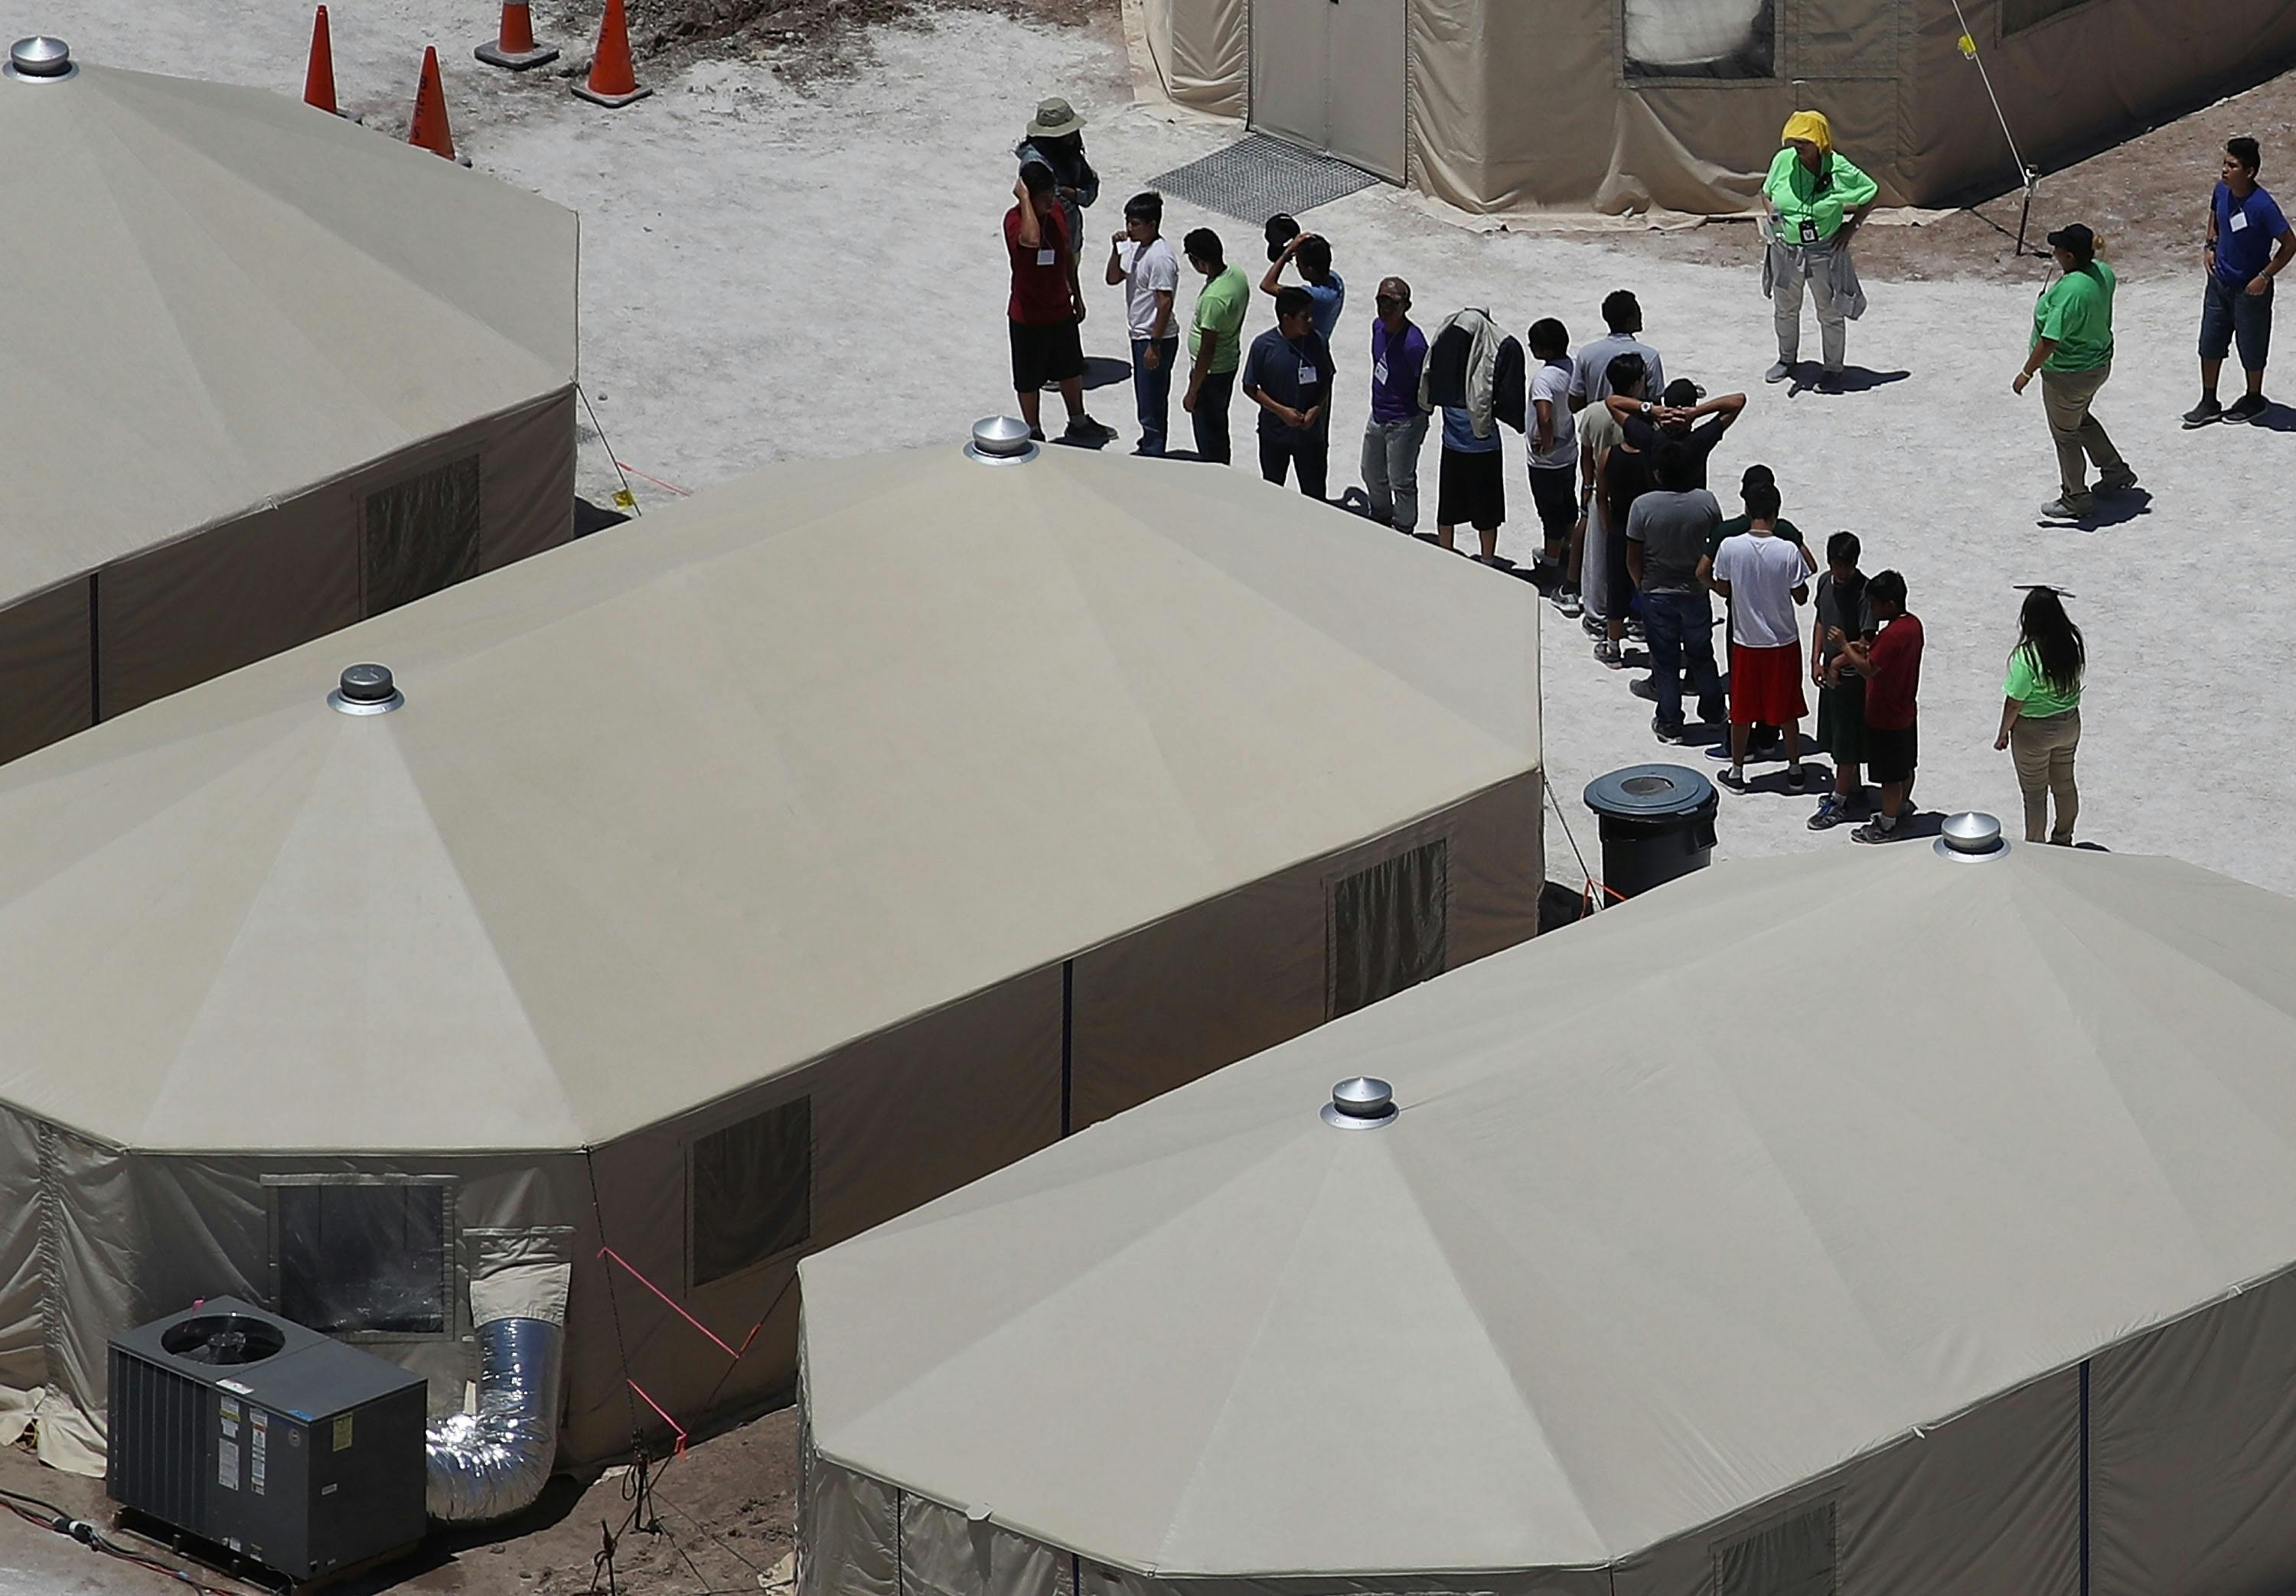 Operators Of Tornillo Tent City For Migrant Children May Not Renew